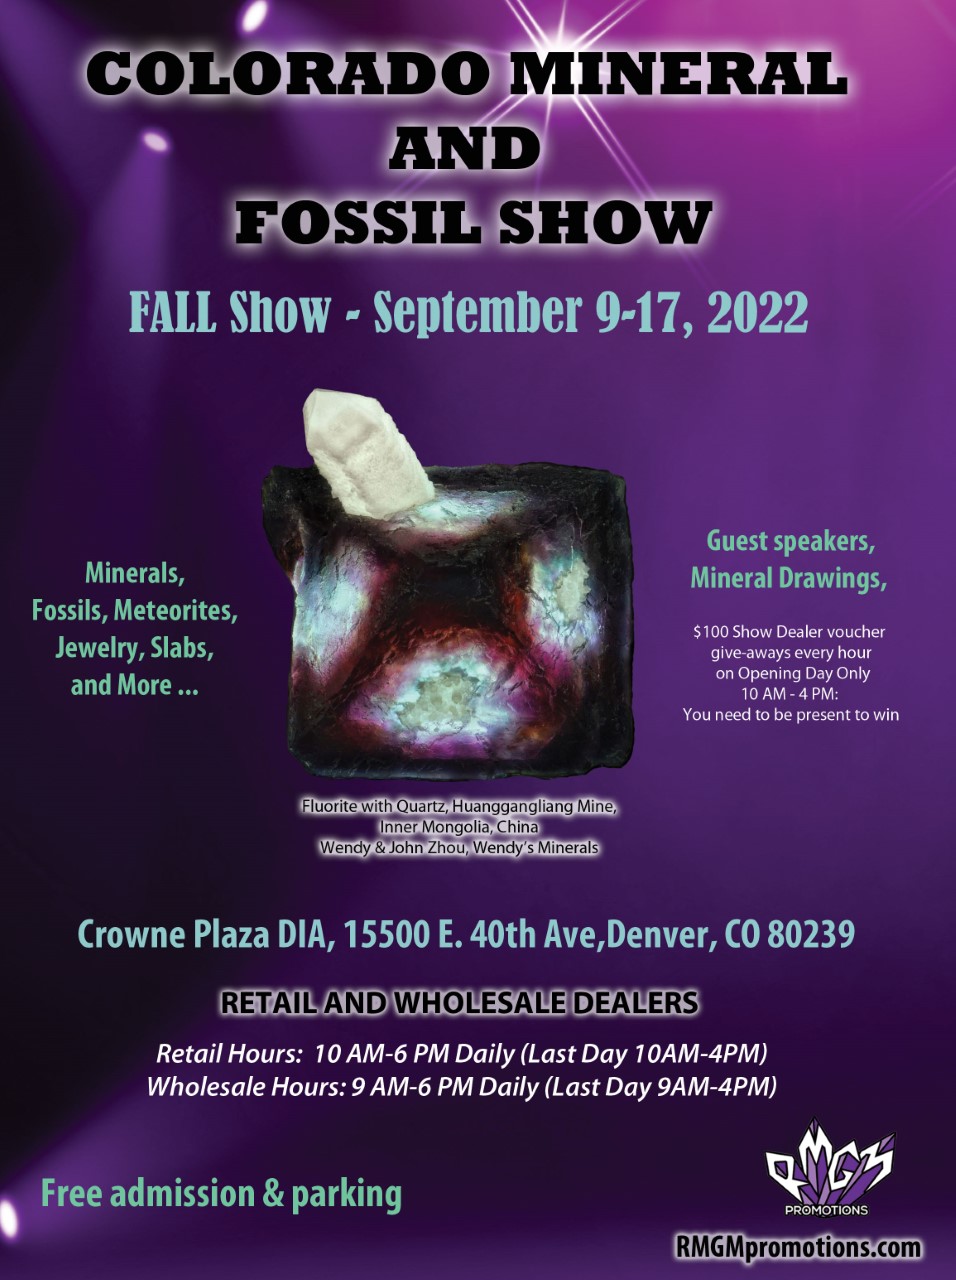 Colorado Mineral and Fossil Fall Show